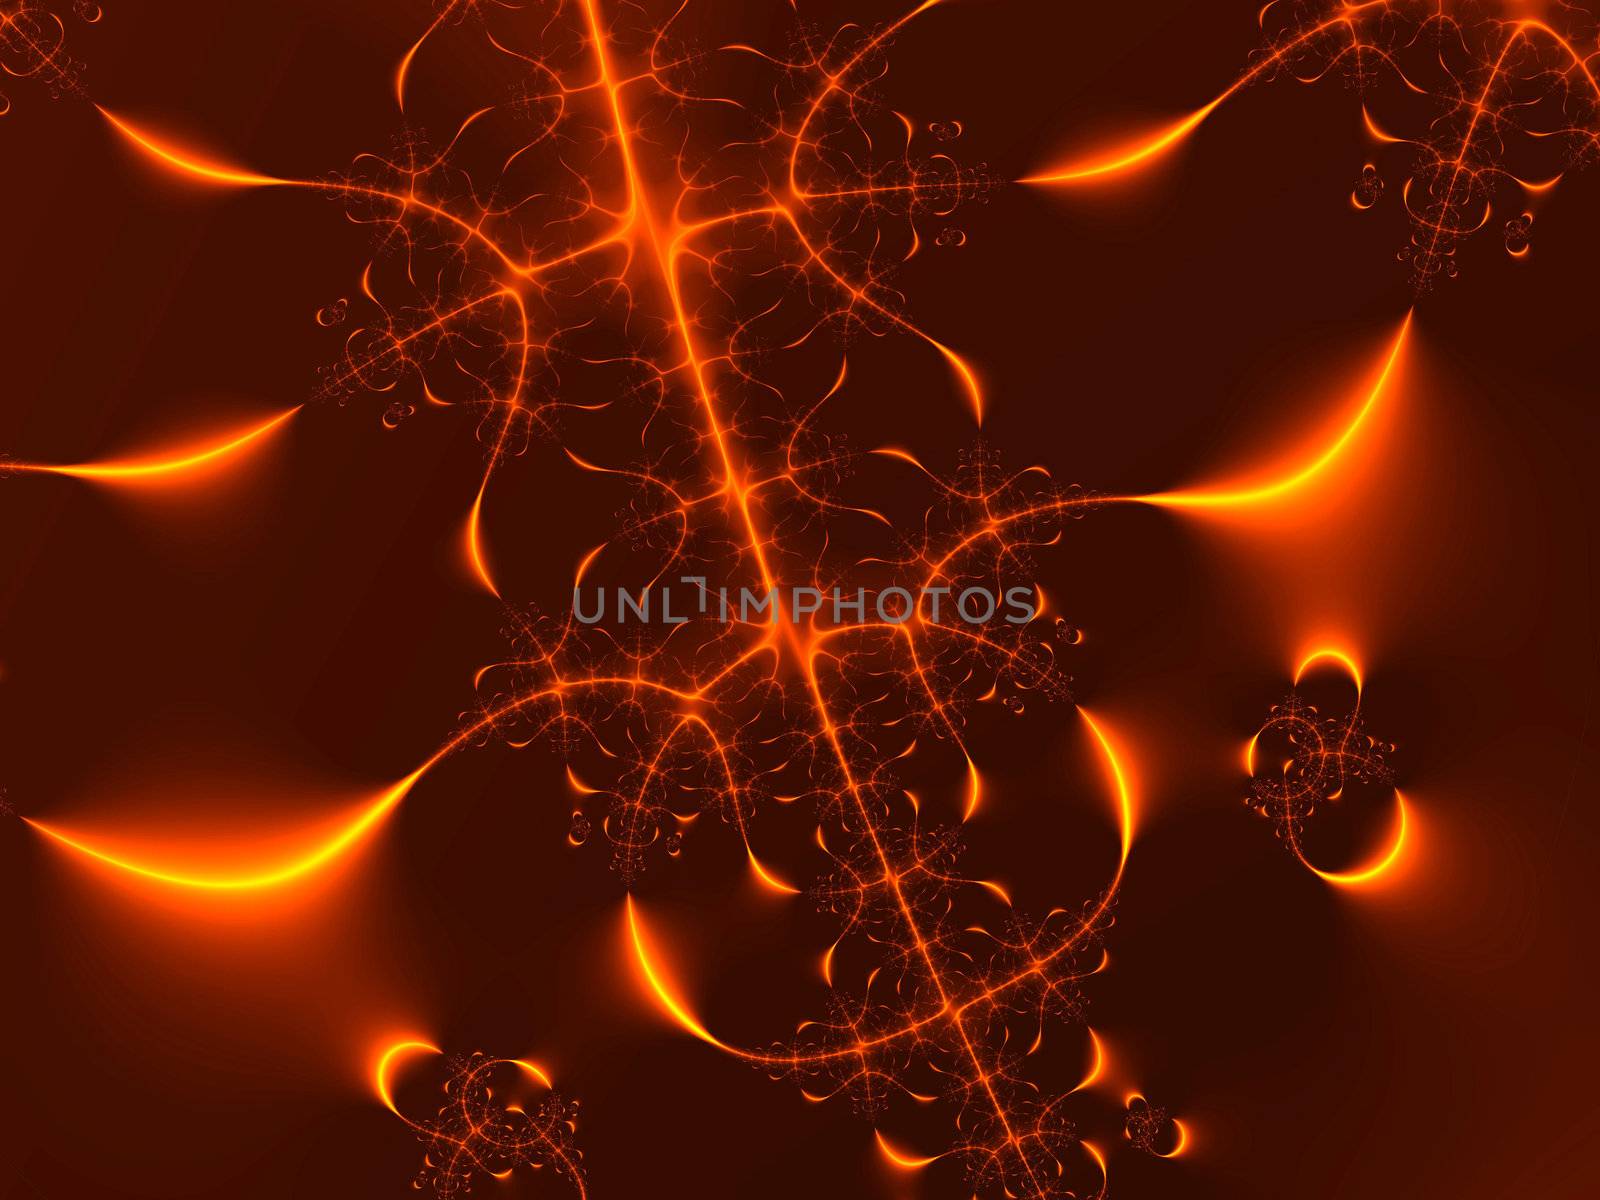 glowing fractal in orange and red